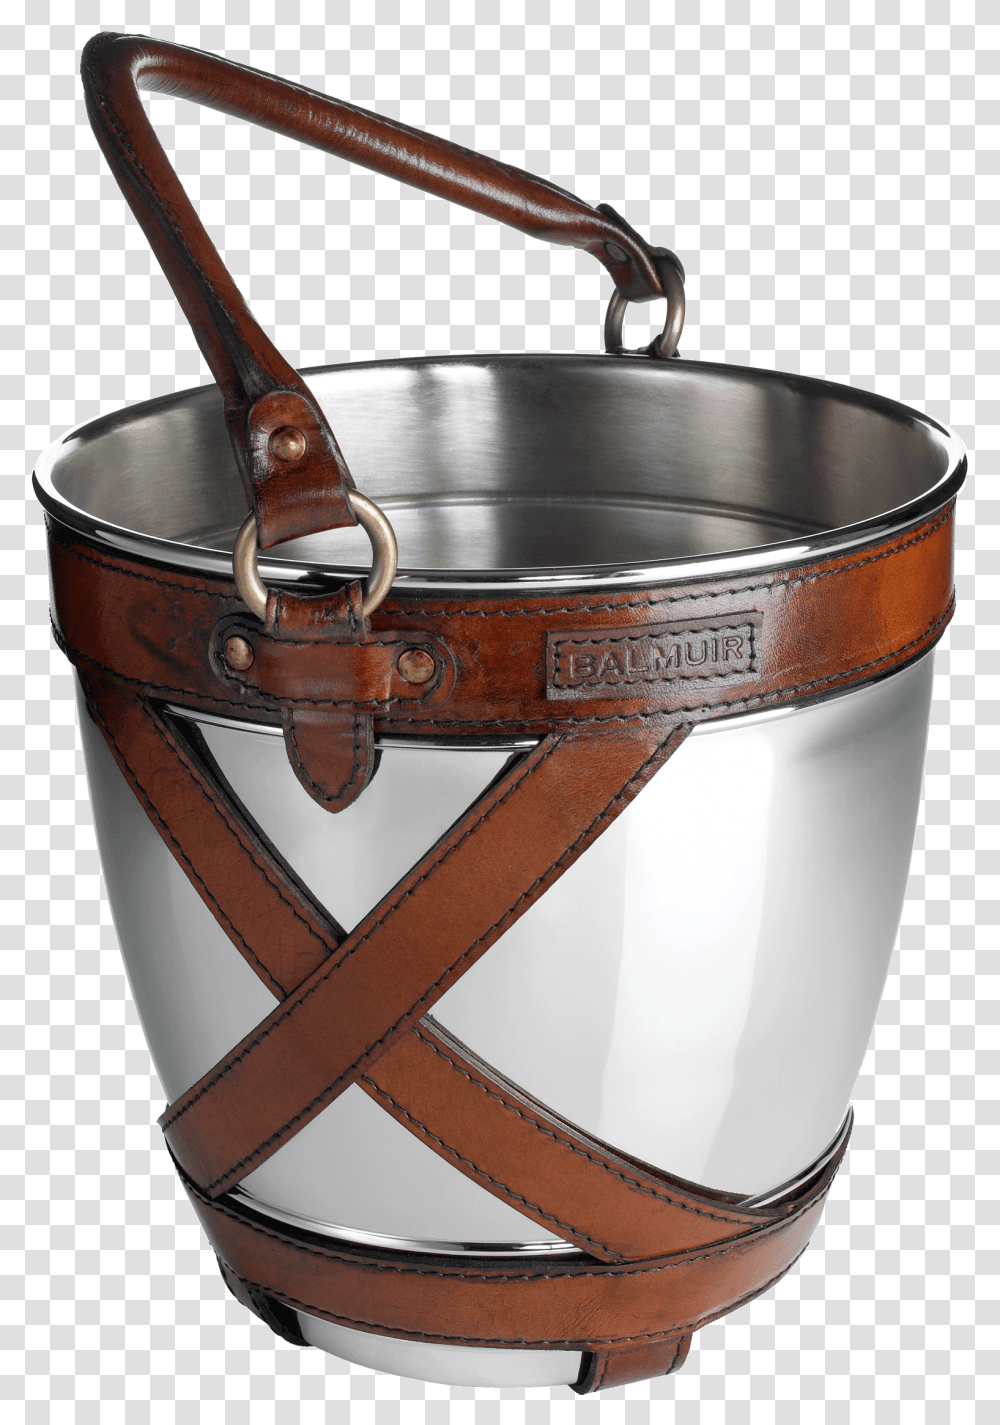 Balmuir Winston Champagne Bucket In Chrome And Leather Dutch Oven, Sink Faucet Transparent Png